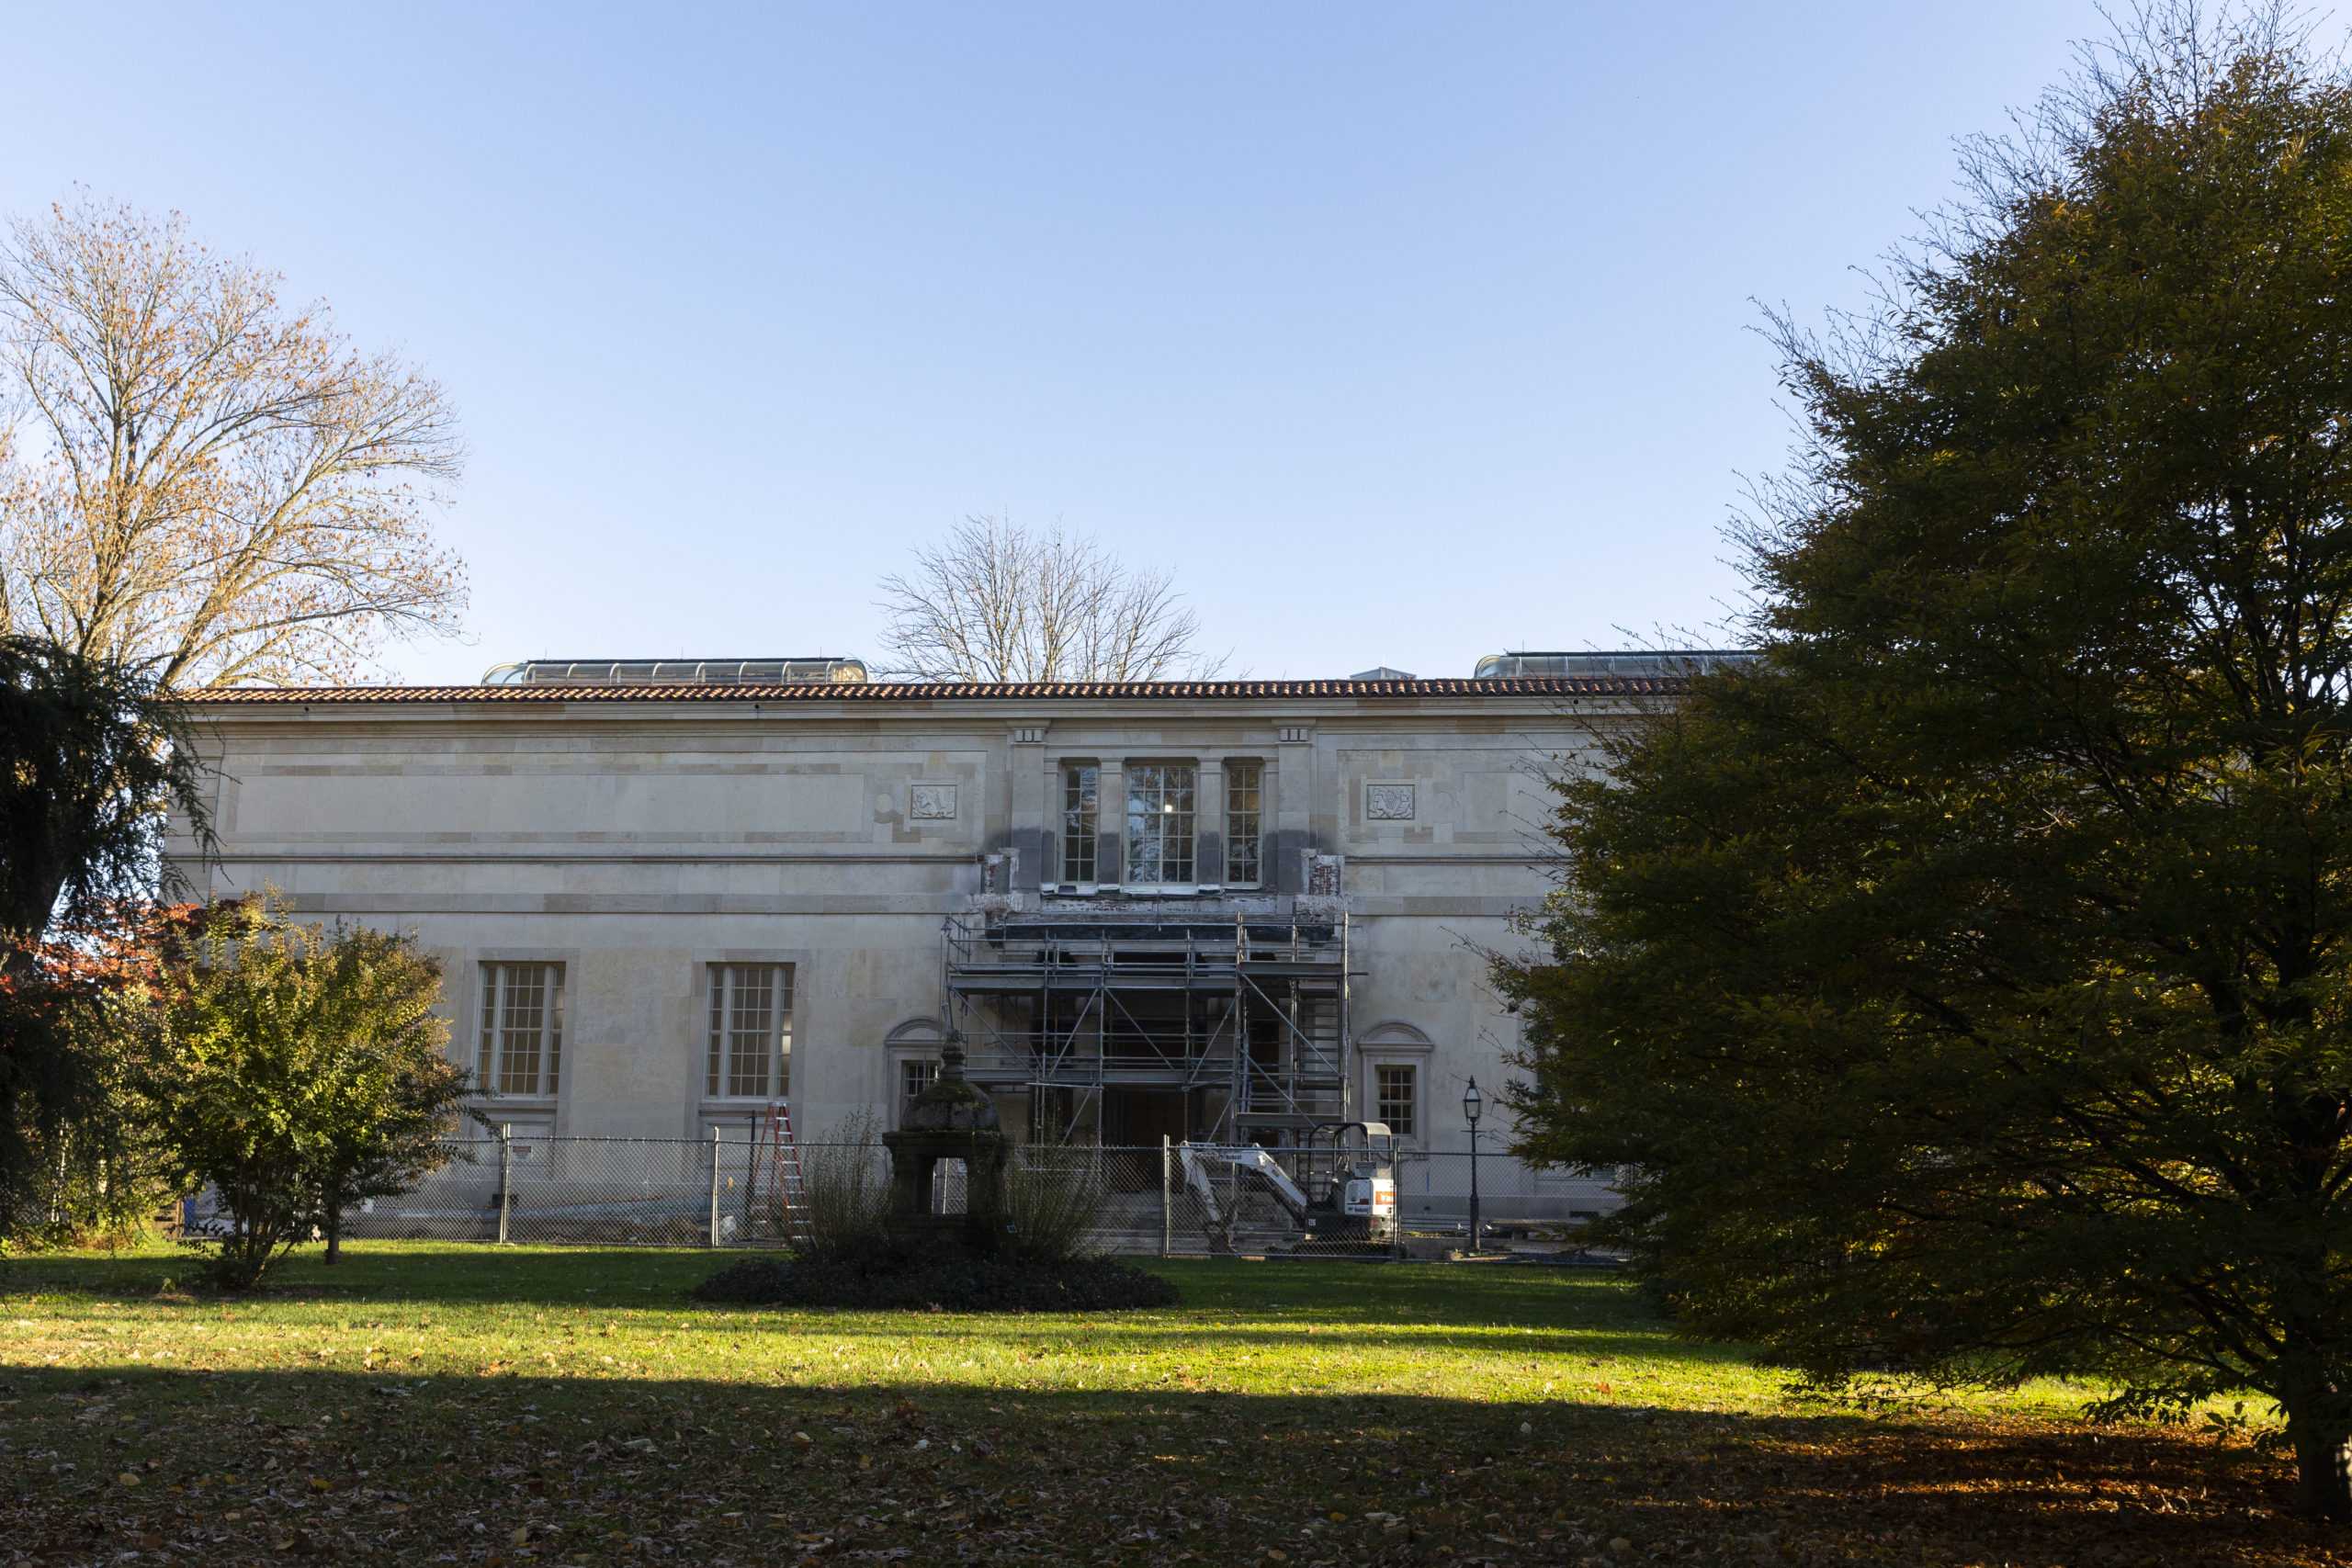 The Barnes property is being renovated into the Frances M. Maguire Art Museum.
PHOTO: MITCHELL SHIELDS ’22/THE HAWK